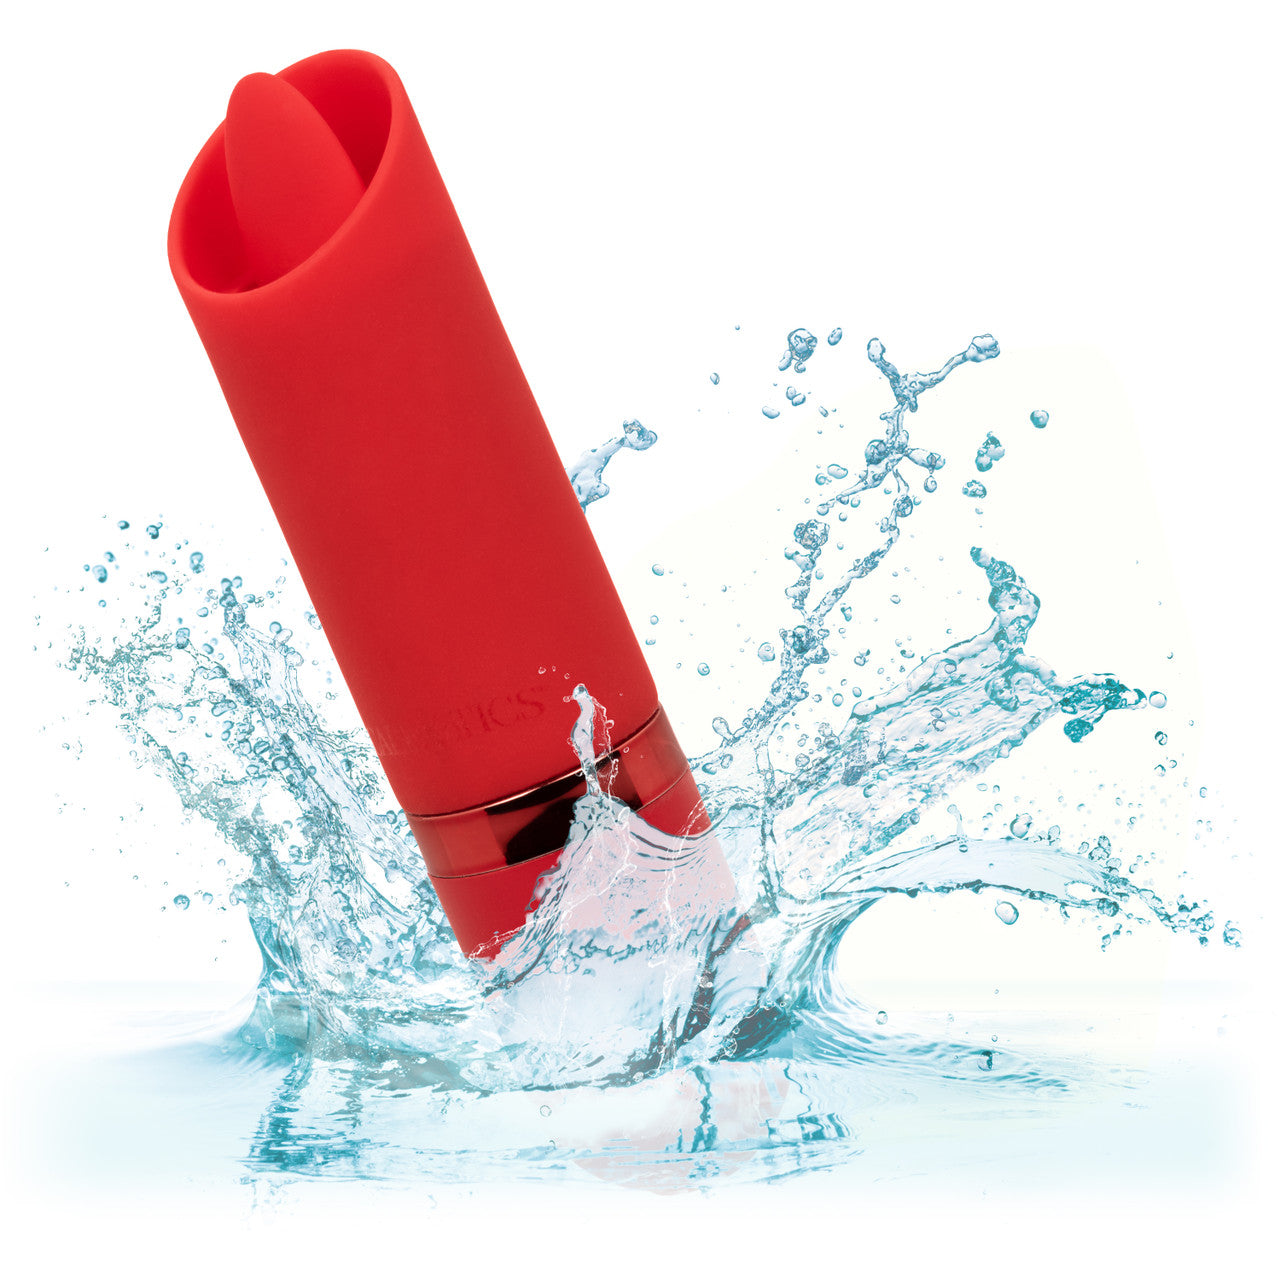 red lipstick-sized vibrator with small flappy tongue clitoral stimulator at the top splashing in water